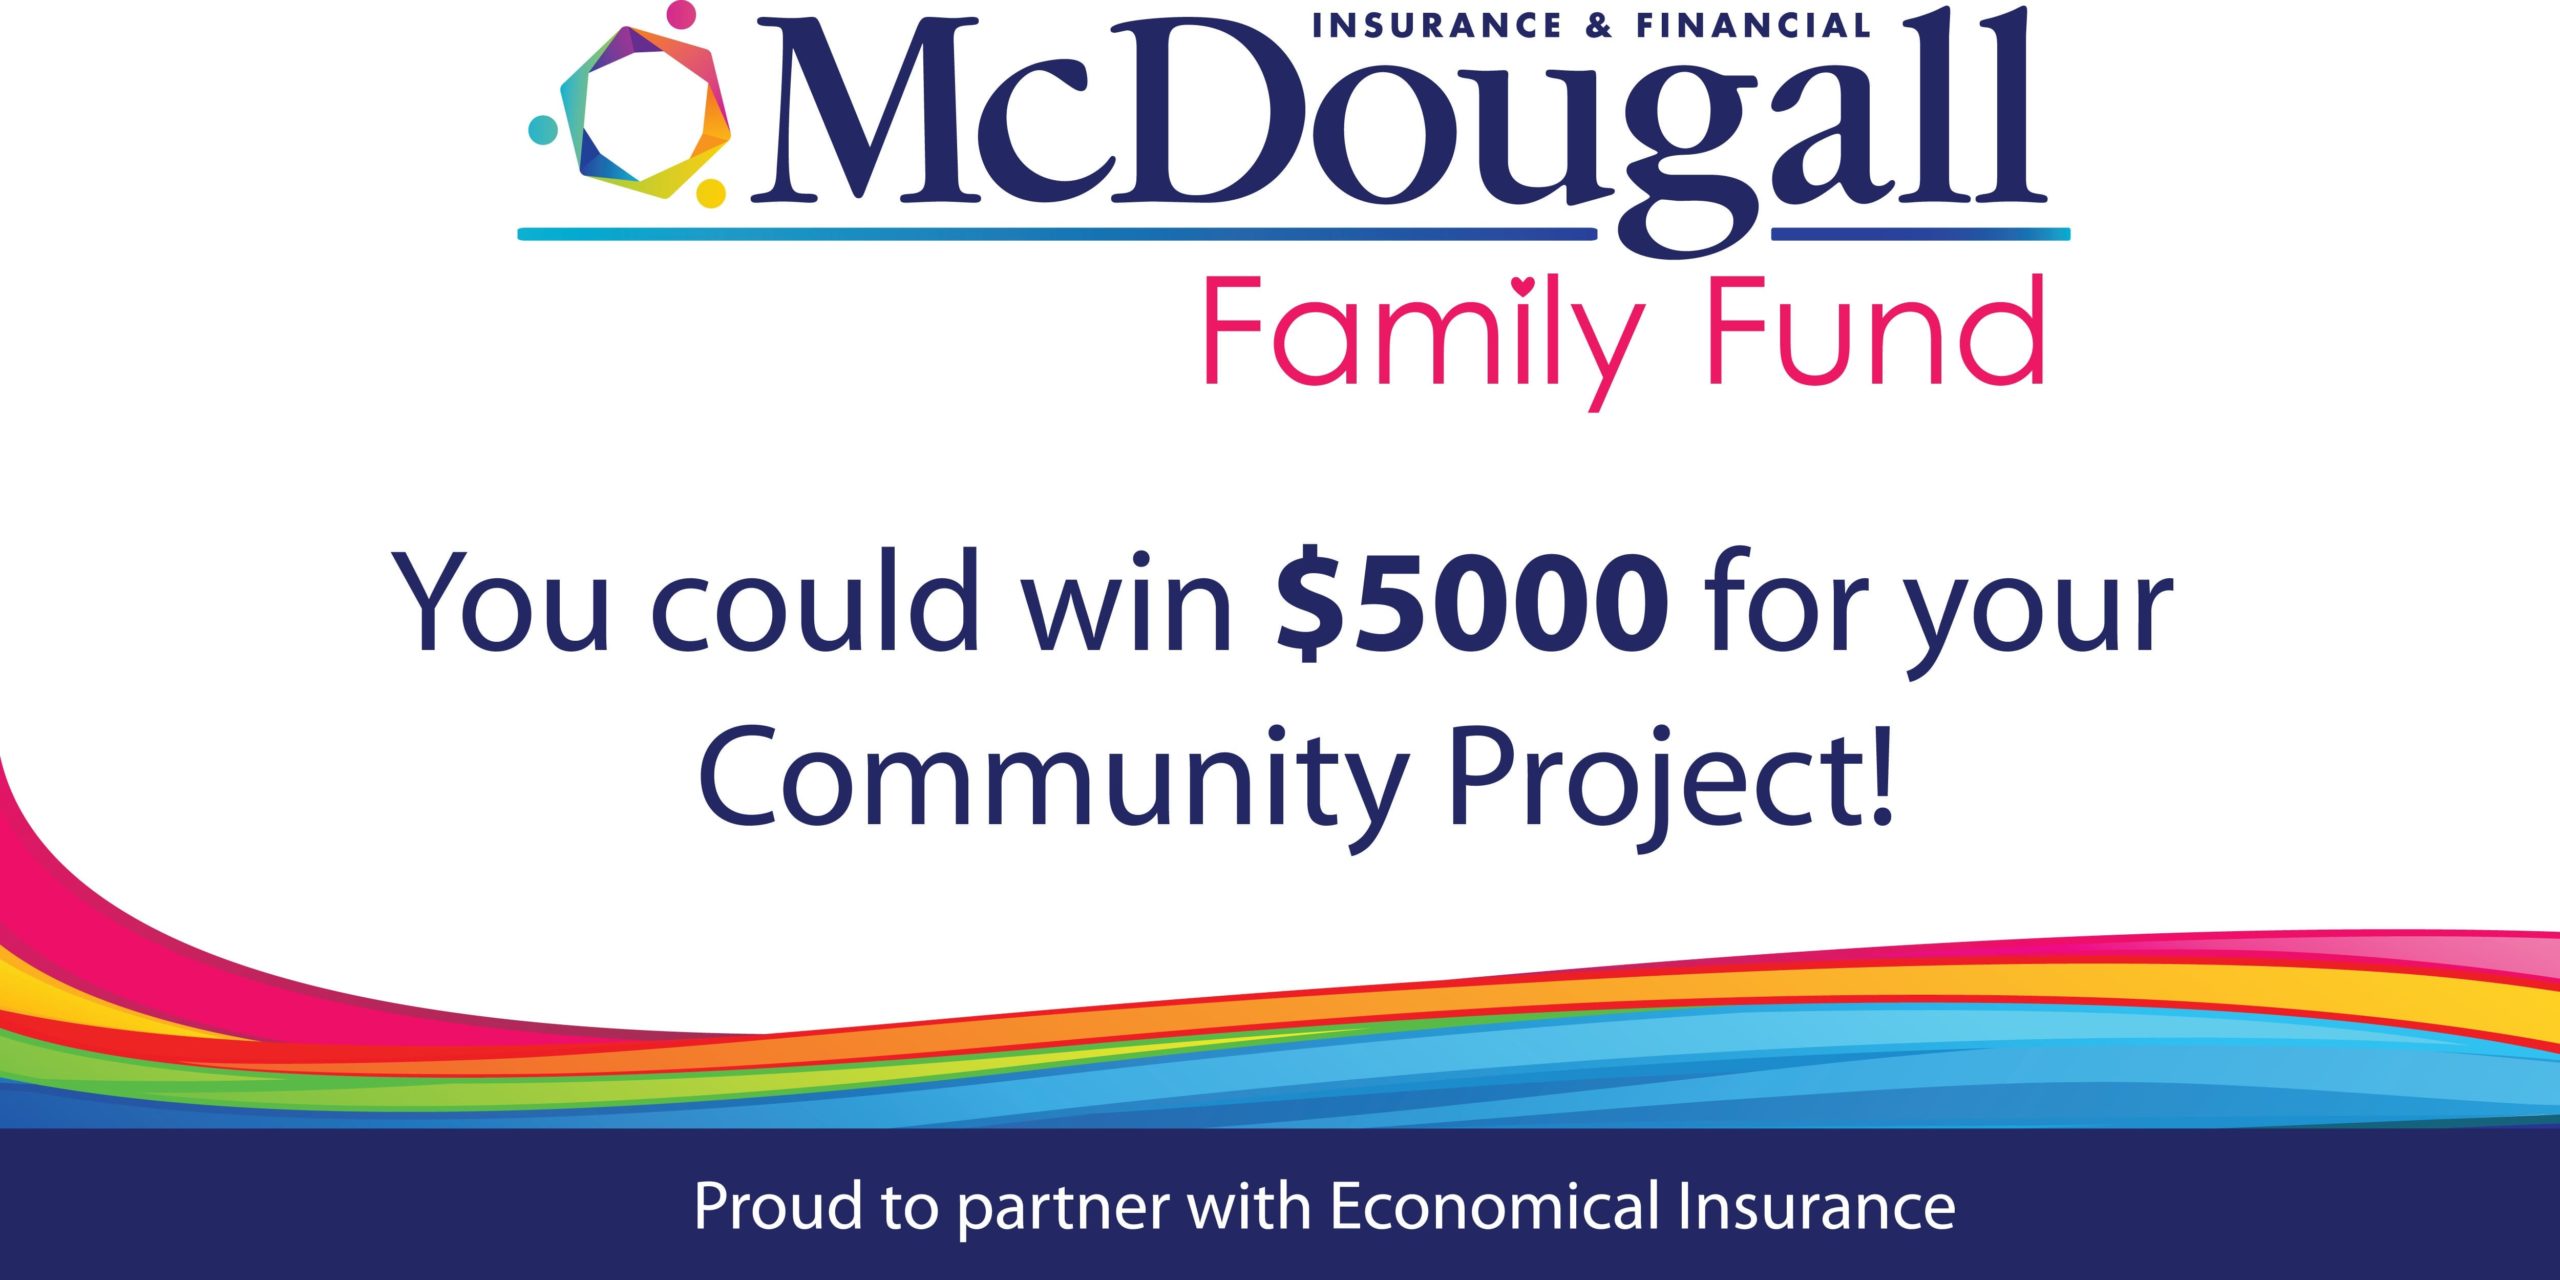 Facebook ad for the McDougall family fun community project